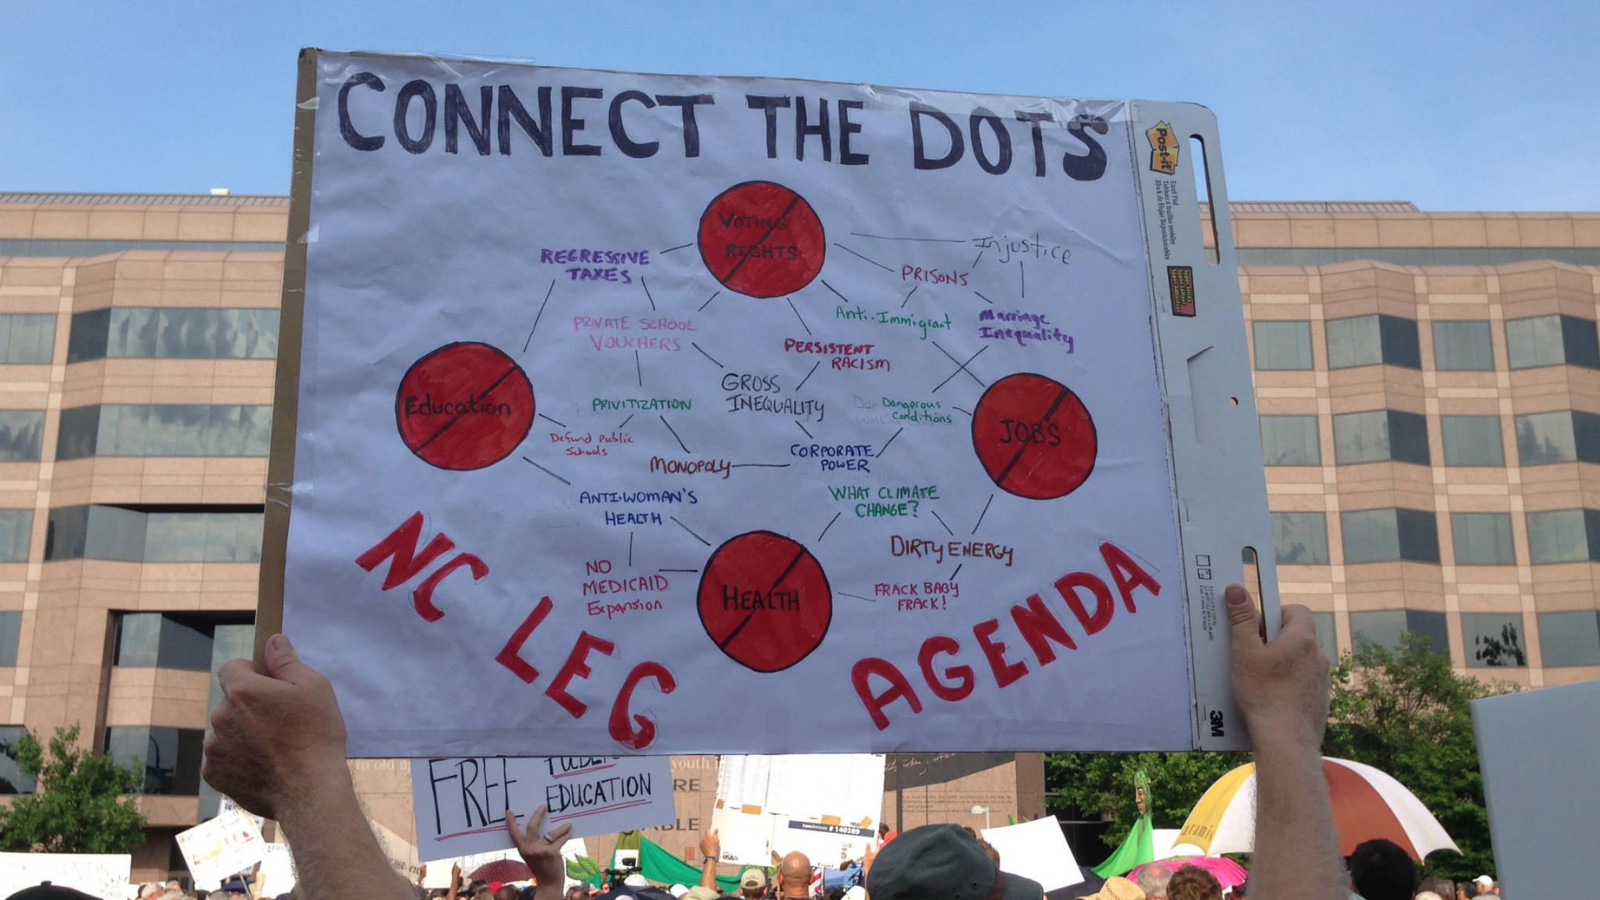 'Connect the dots - NC Leg Agenda' sign held high